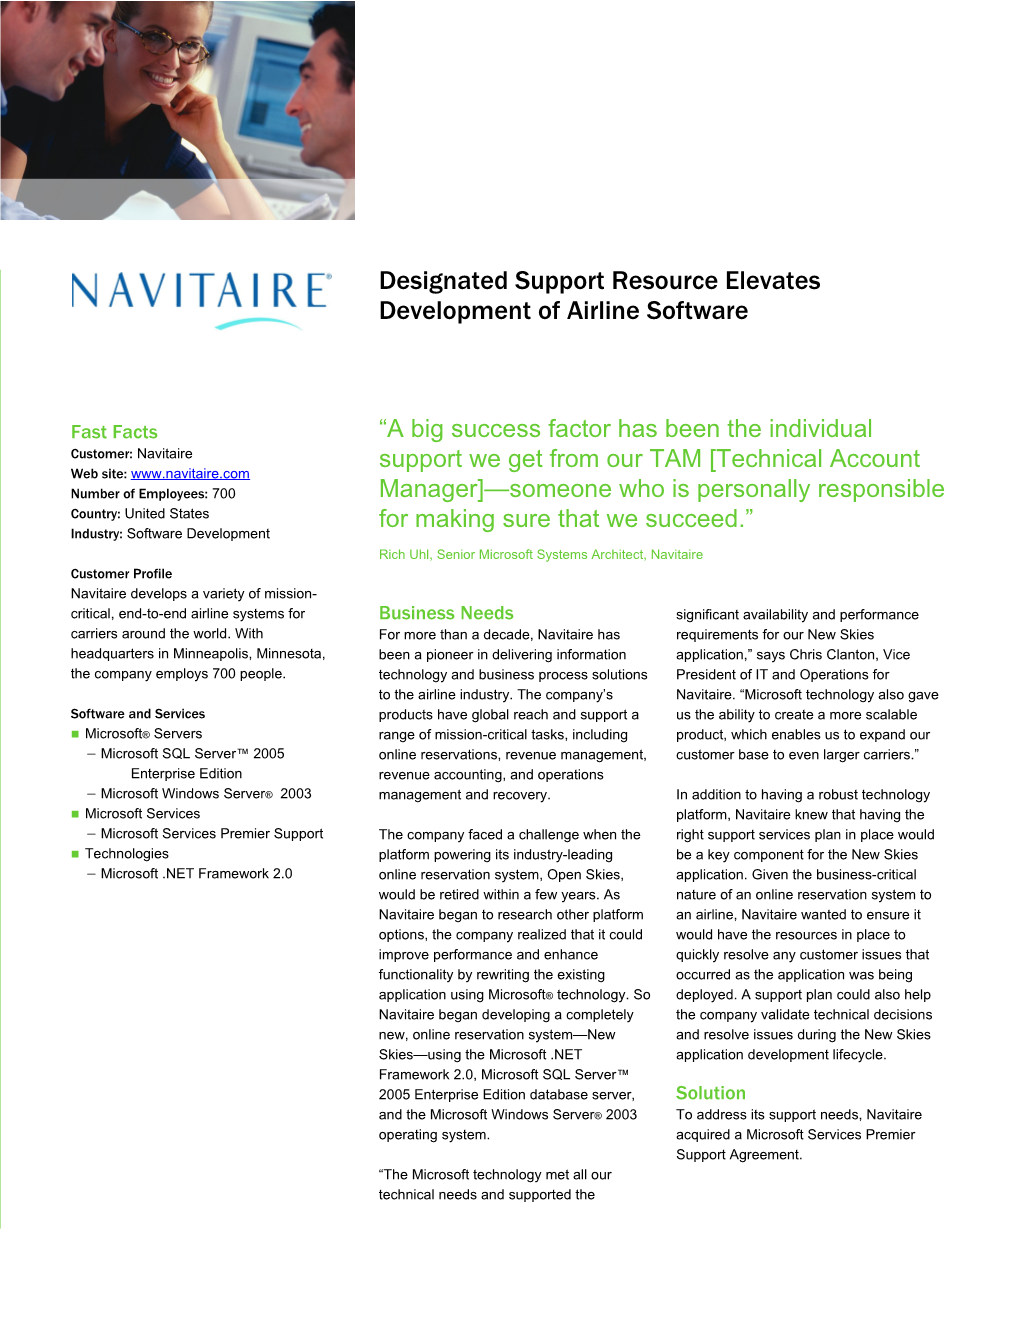 Designated Resource from Microsoft Support Elevates Development of Airline Software